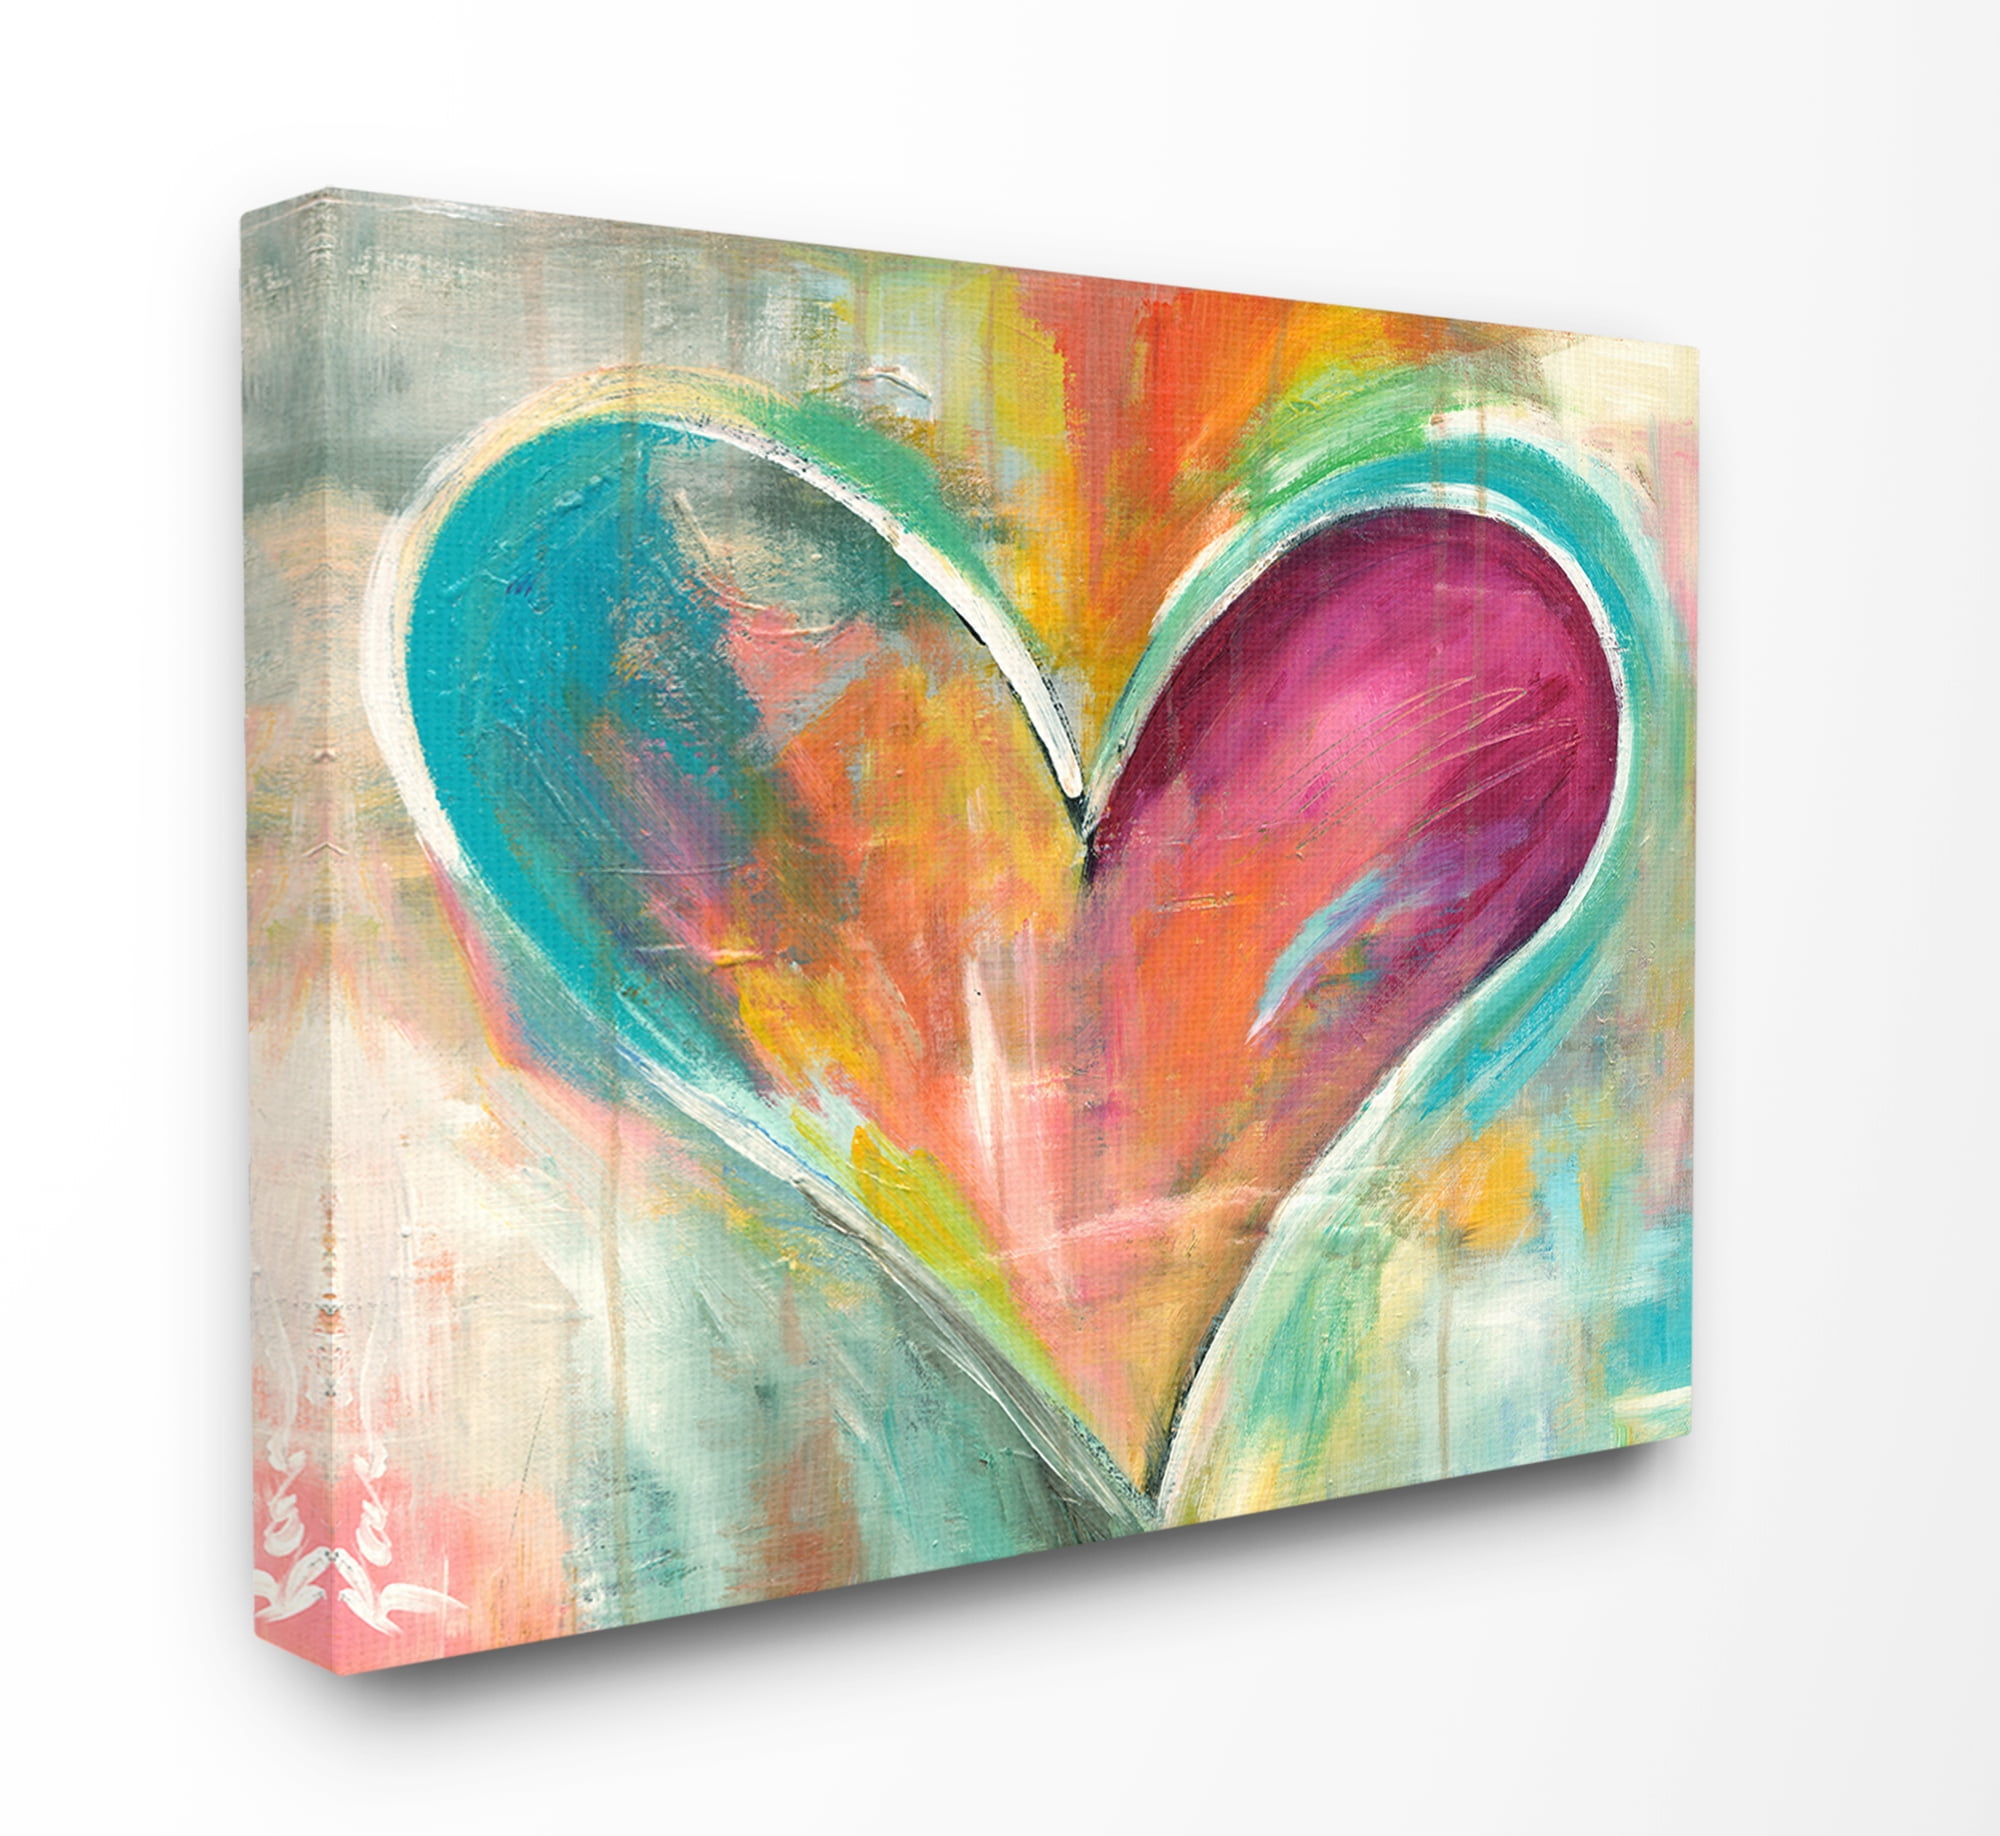 Kreative Arts 3 Pieces Canvas Wall Art Love Heart Painting with Frame Modern Pink Artwork Abstract Home Decor Giclee Prints Gallery Wrapped Art Work for Couple Bedroom Walls Decorations 16x24inchx3pcs 